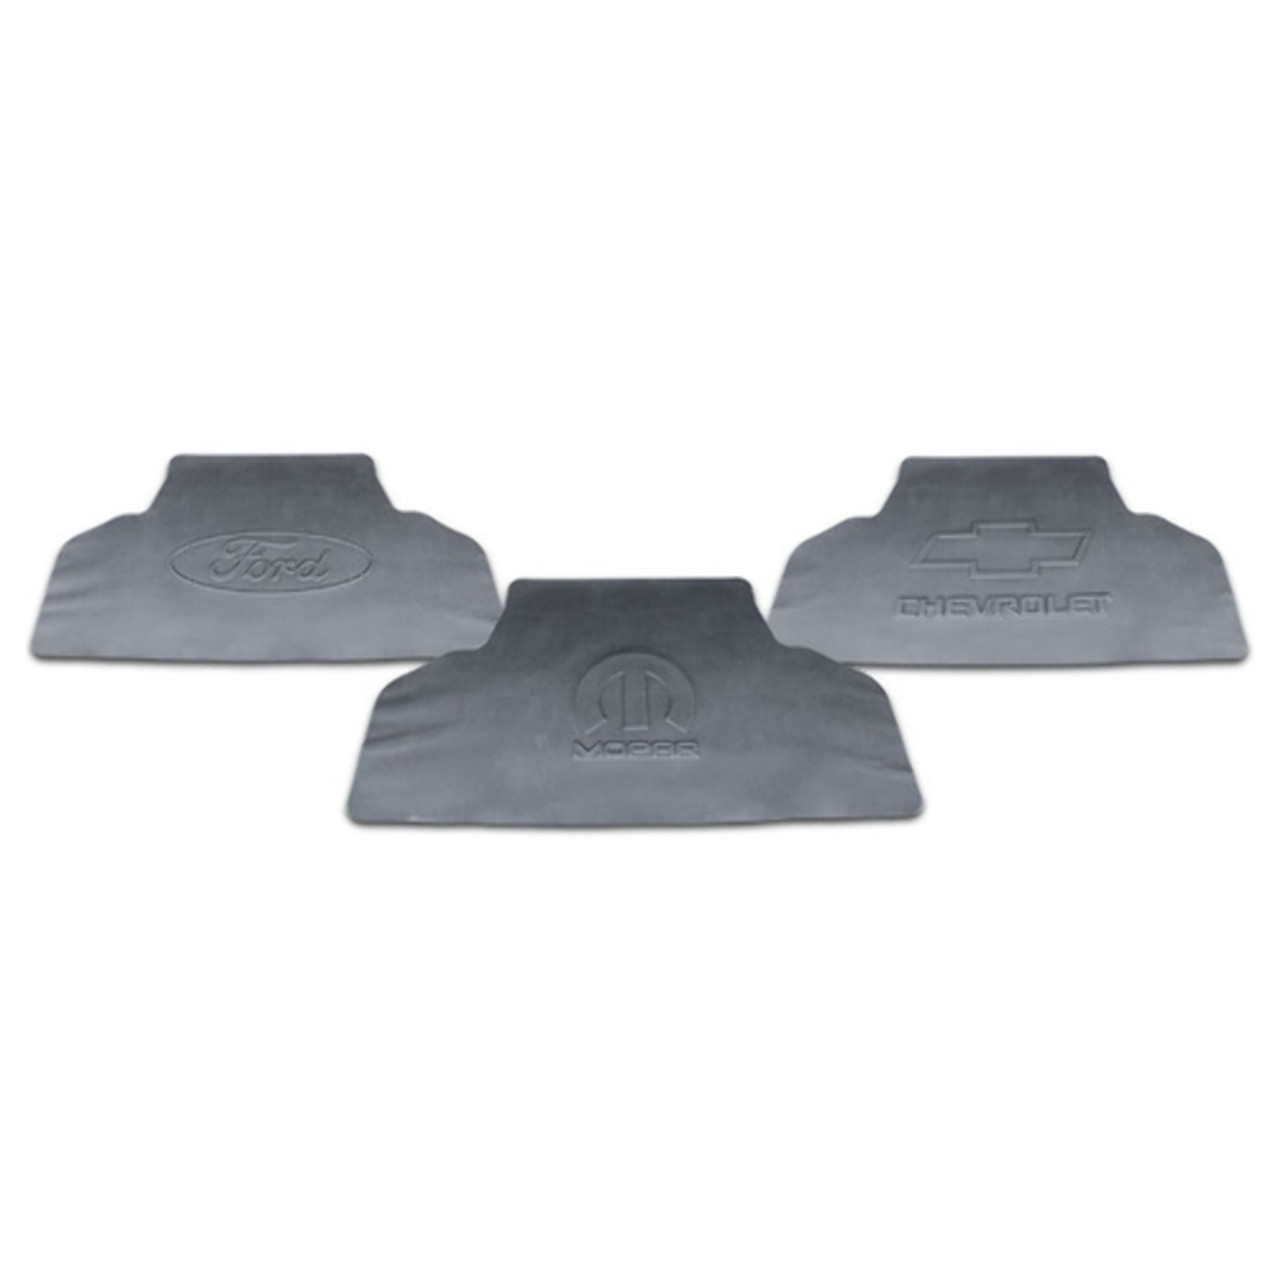 1949-52 Chevrolet Trunk Rubber CHEV Rubber Only..Made Definition Cover of High 4952-TRFM-G-082 Ultra Smooth Floor Mat